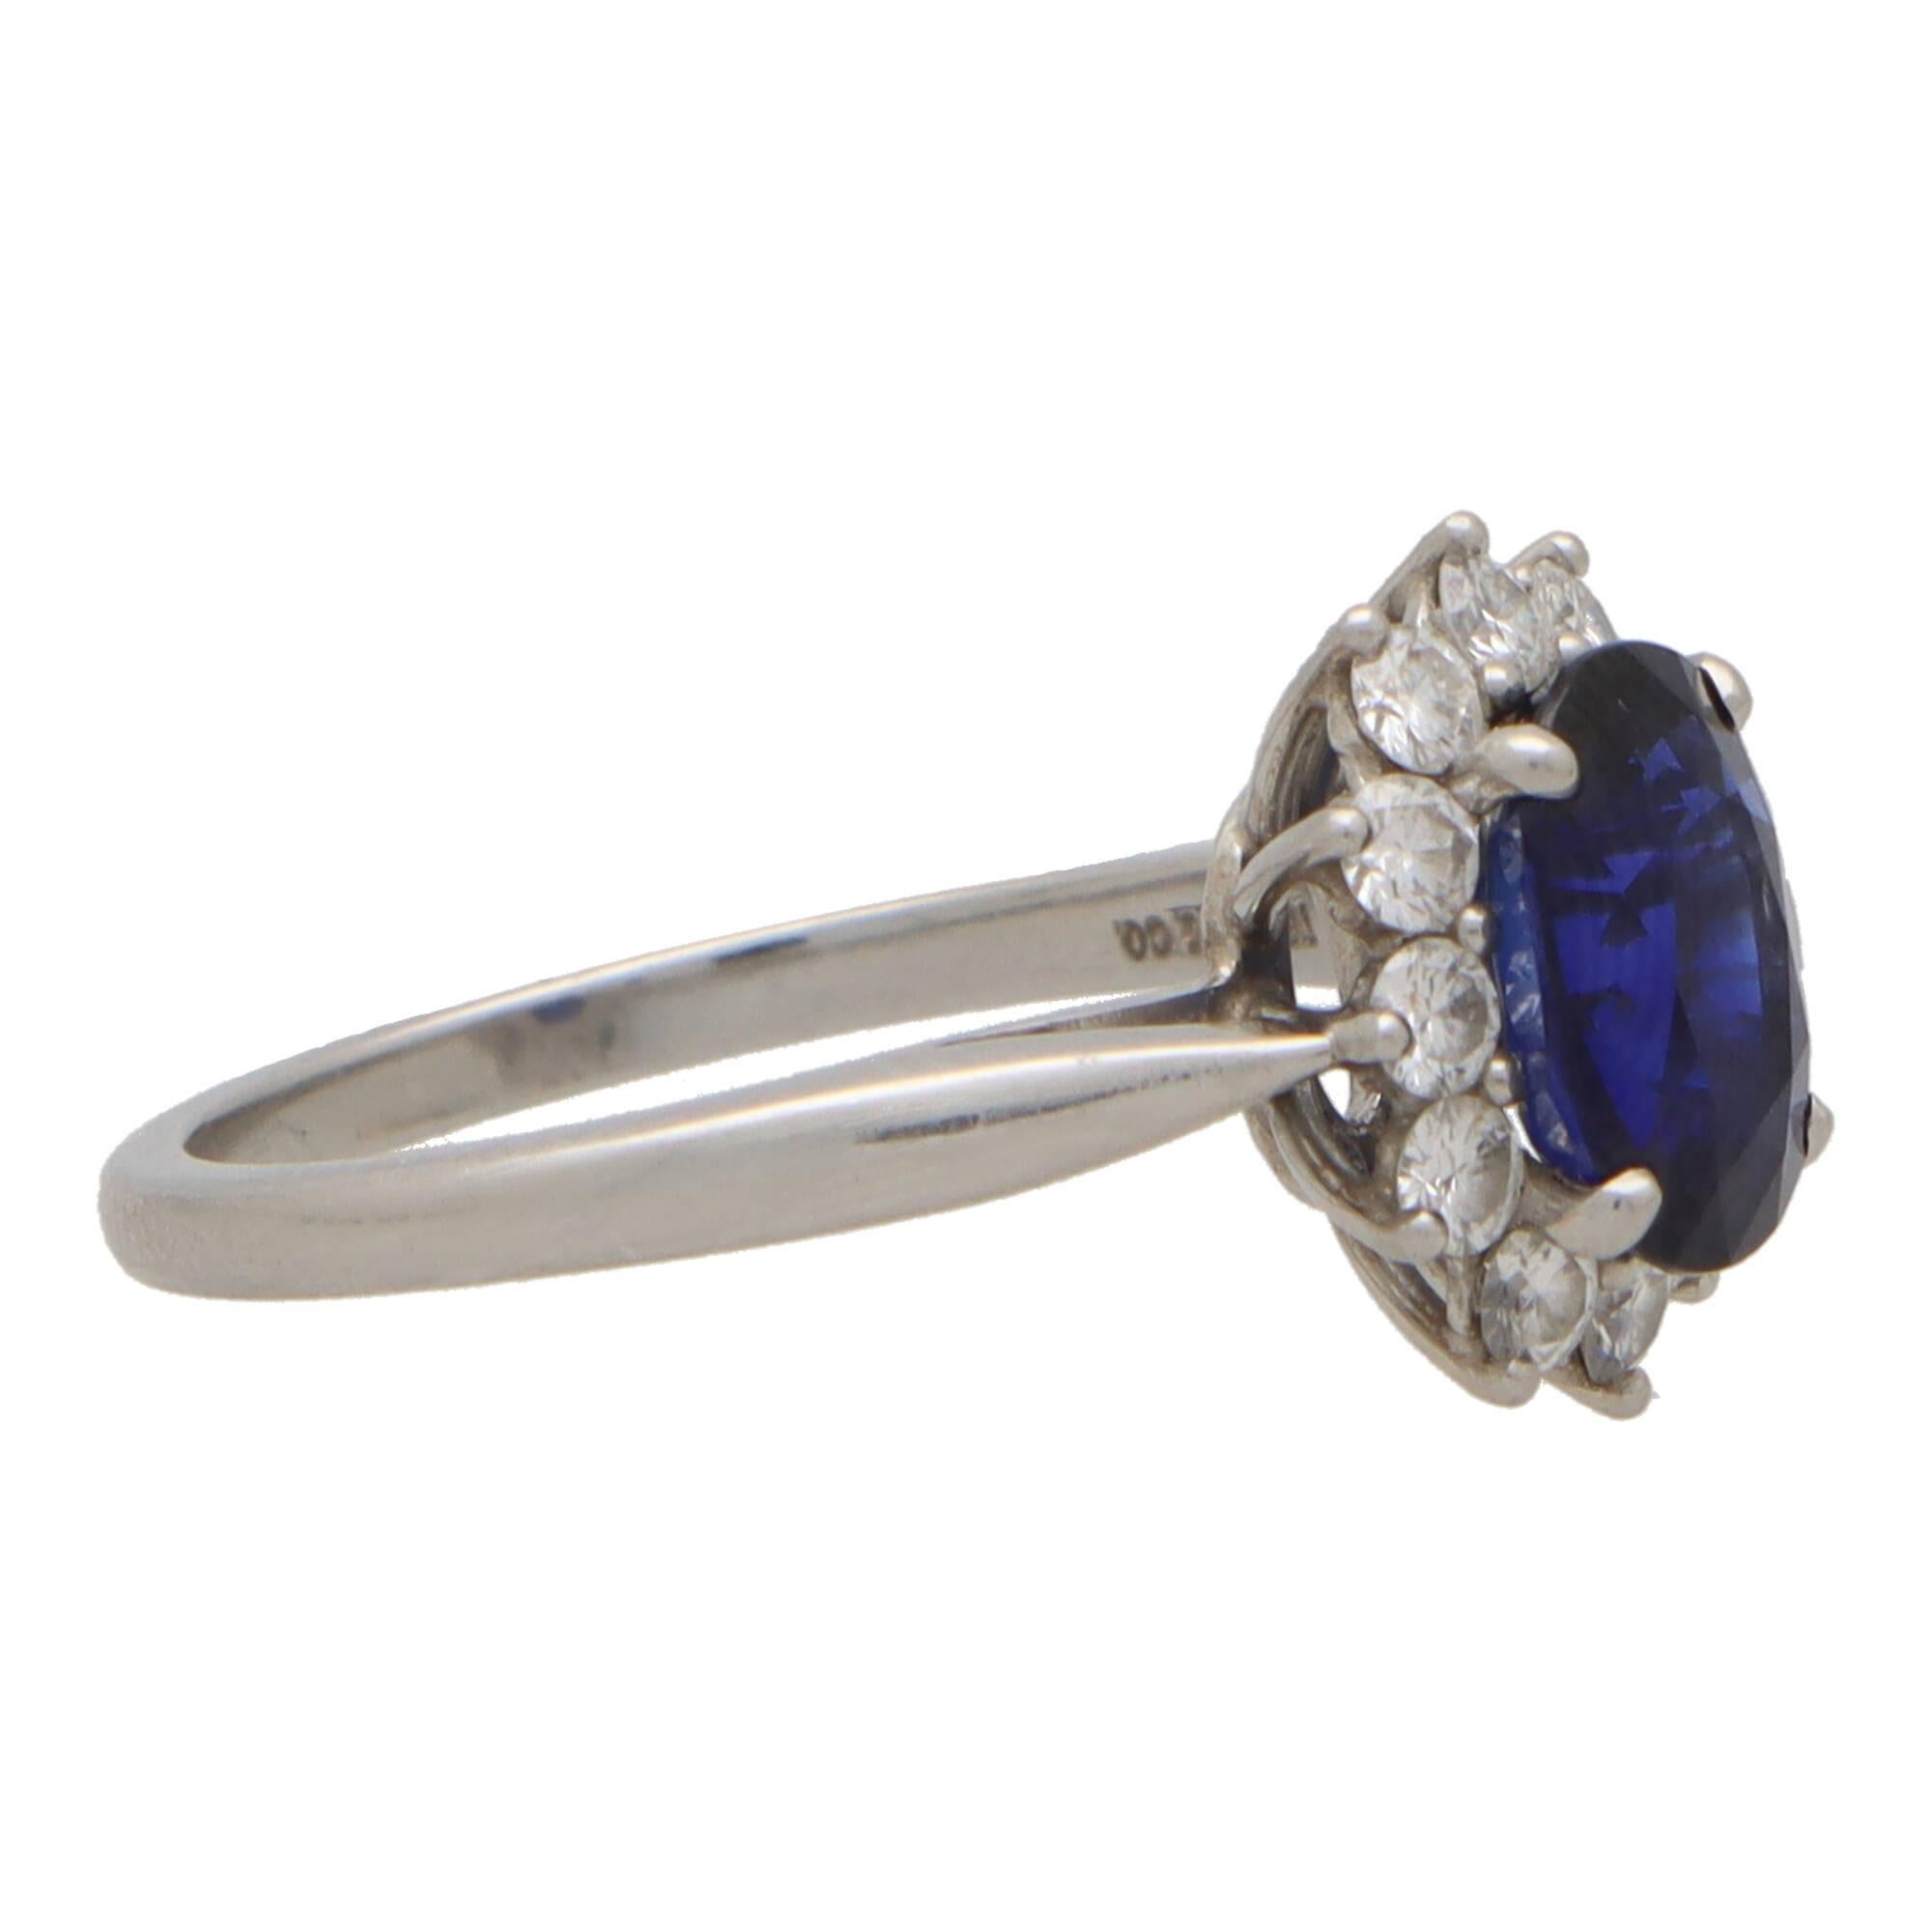 A beautiful vintage Tiffany & Co. sapphire and diamond cluster ring set in platinum.

The piece is centrally set with a vibrant oval cut sapphire which is four-claw set securely. The sapphire has a fantastic blue colour to it and is surrounded by a